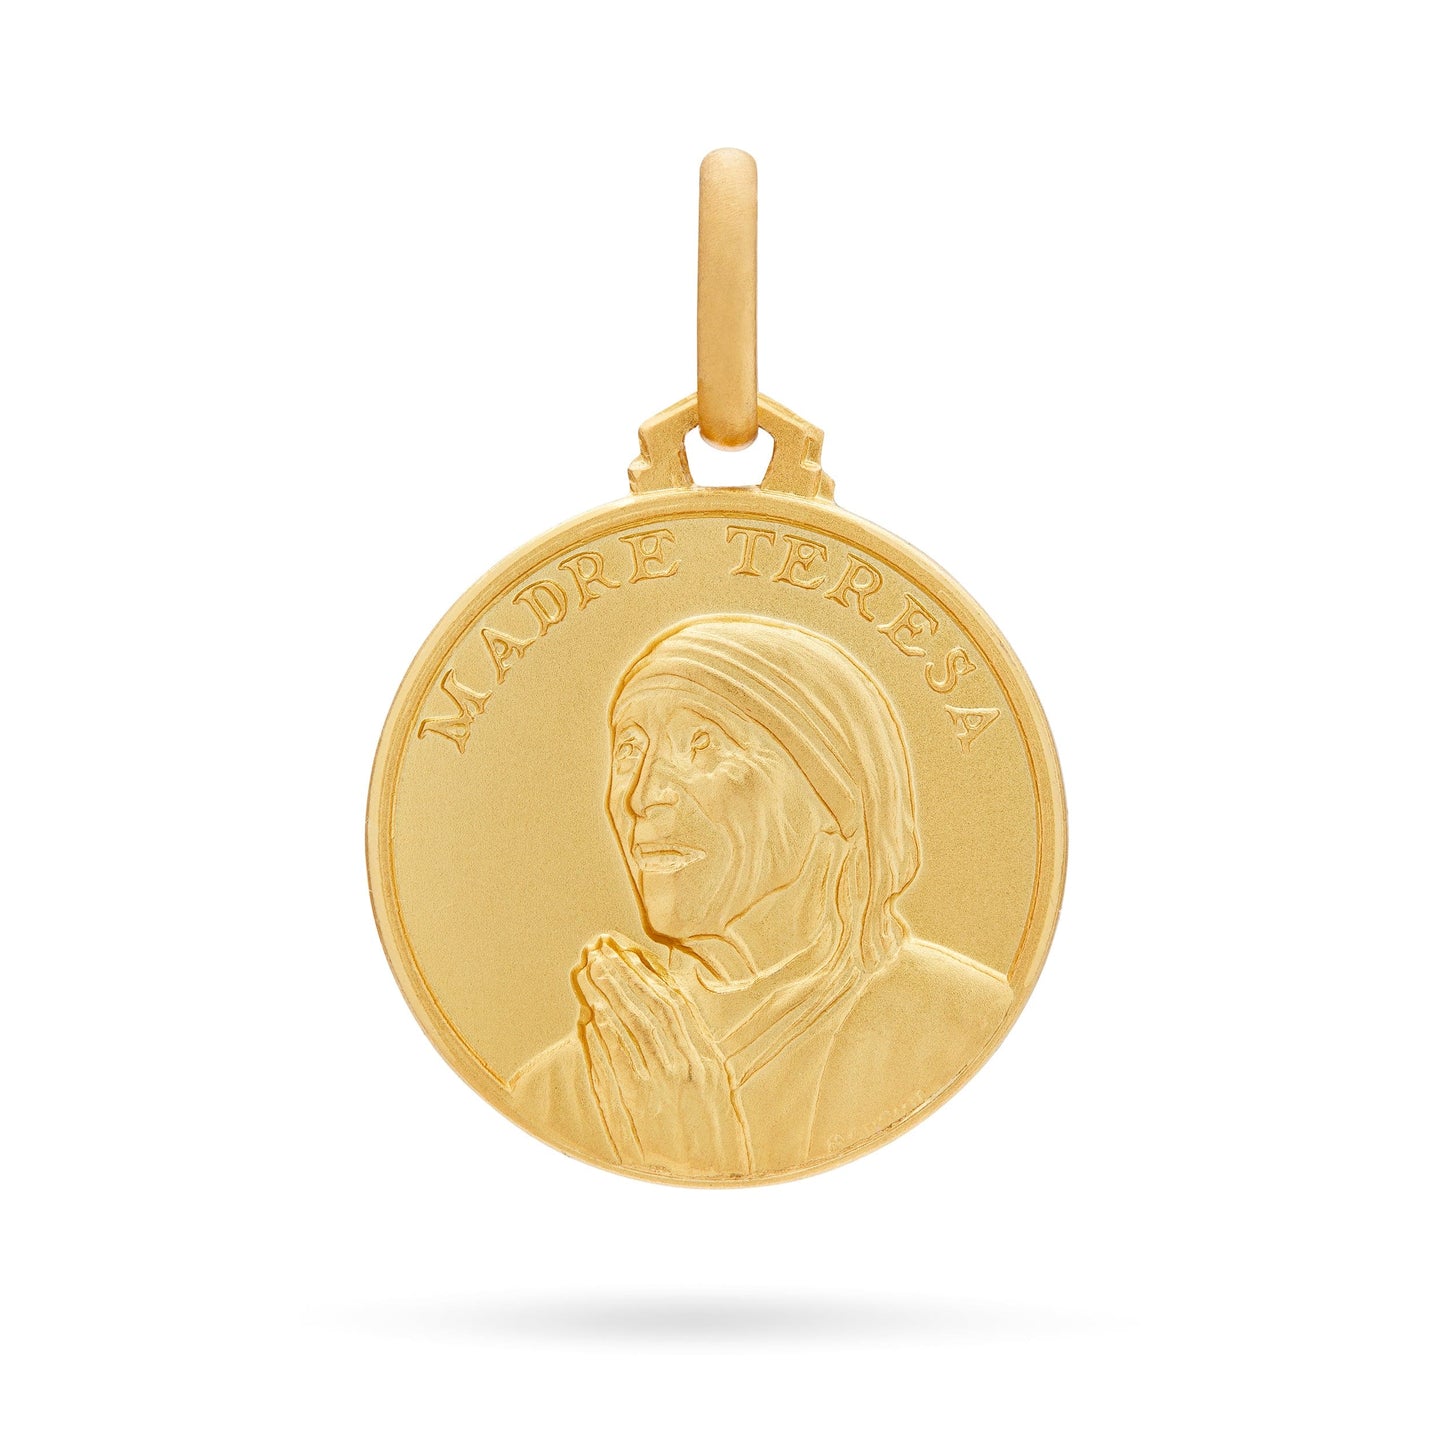 MONDO CATTOLICO 12 mm (0.47 in) Saint Mother Teresa Gold Medal